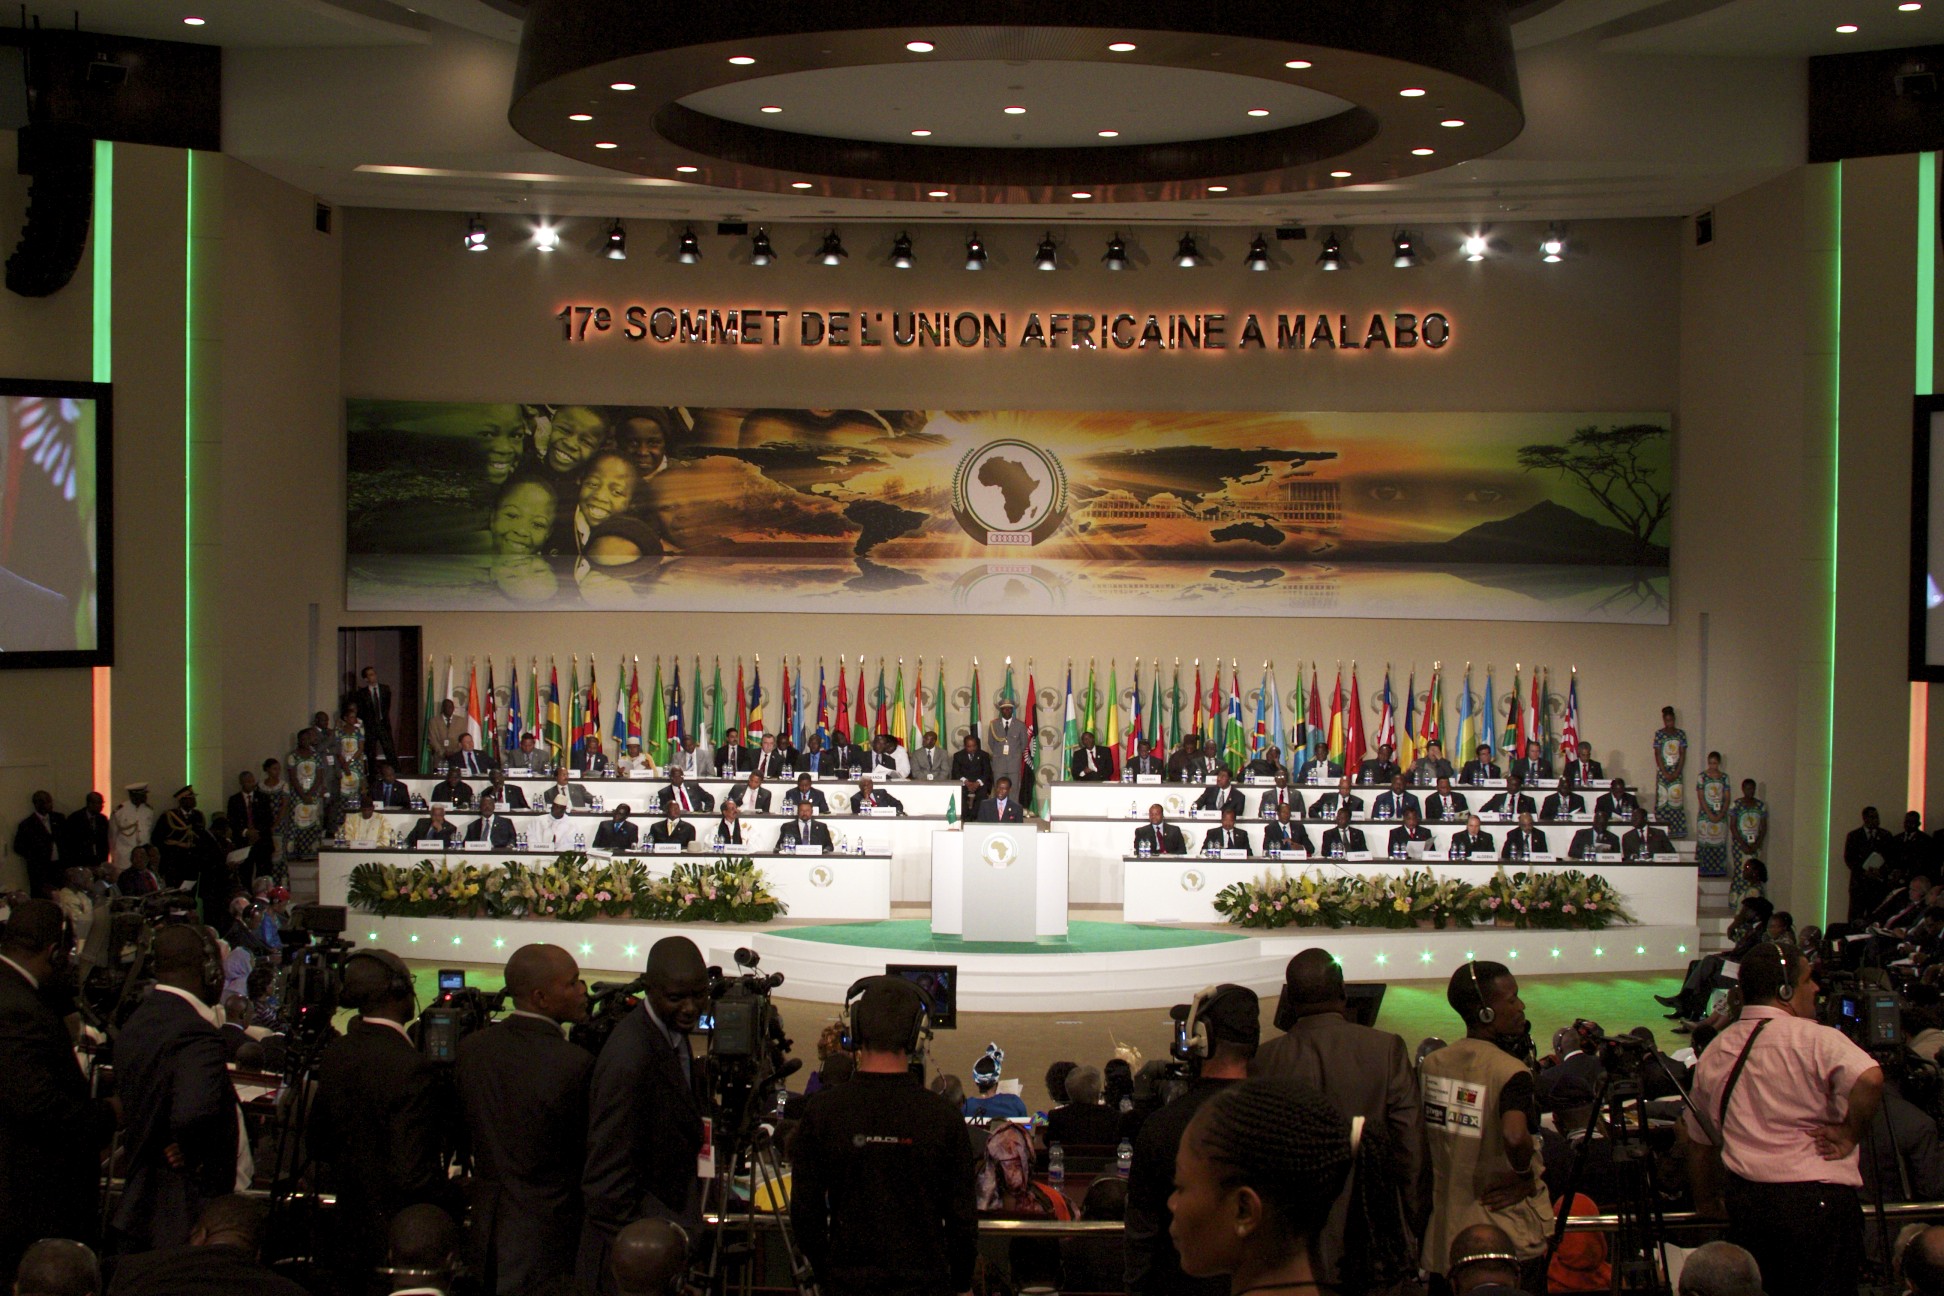 17th Ordinary African Union Summit in Malabo, Equatorial Guinea, July 2, 2011. 